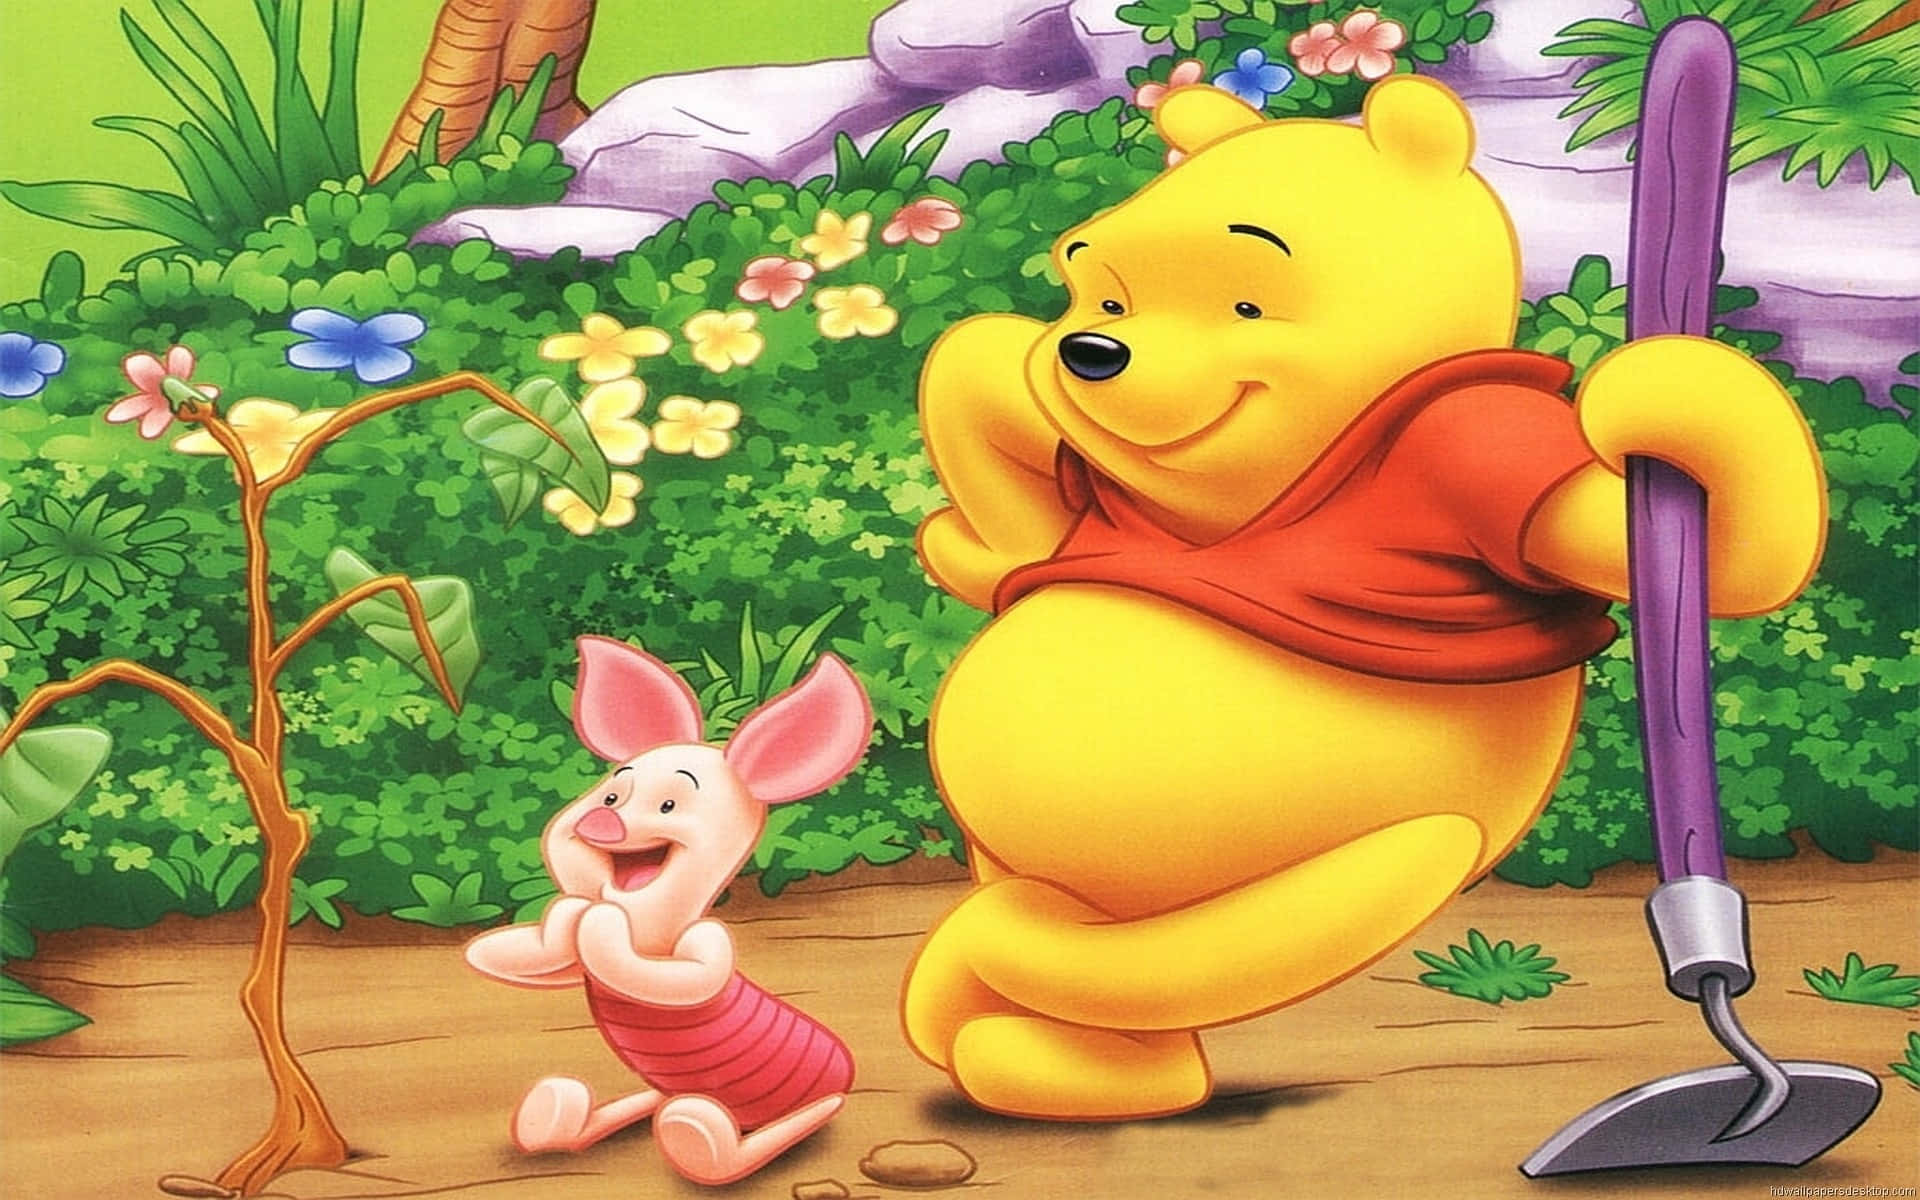 Enjoy A Slice Of Friendship With Winnie The Pooh Background